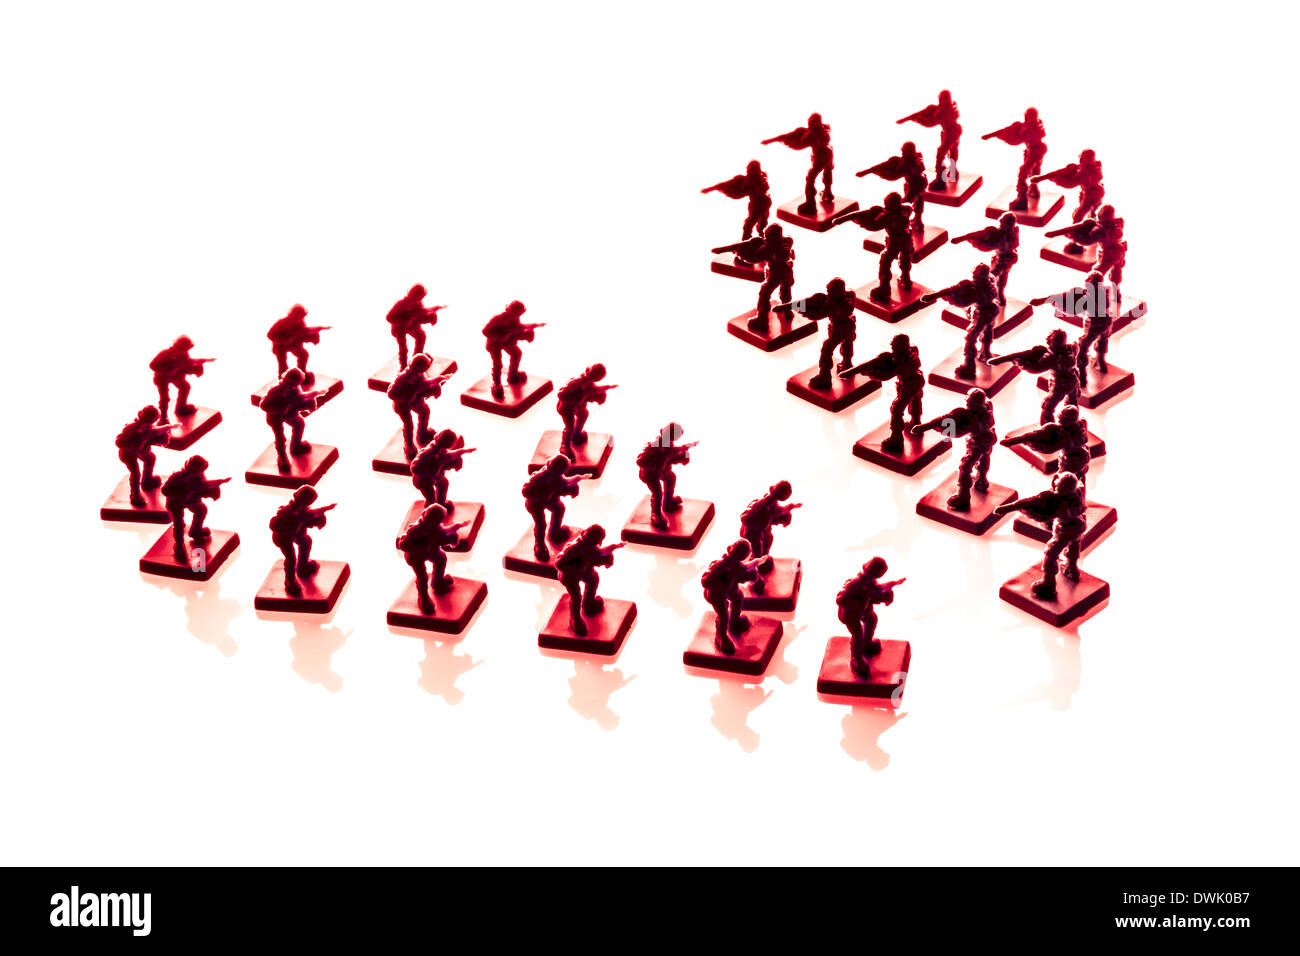 Plastic soldiers forming a heart split in two, on white background. Stock Photo